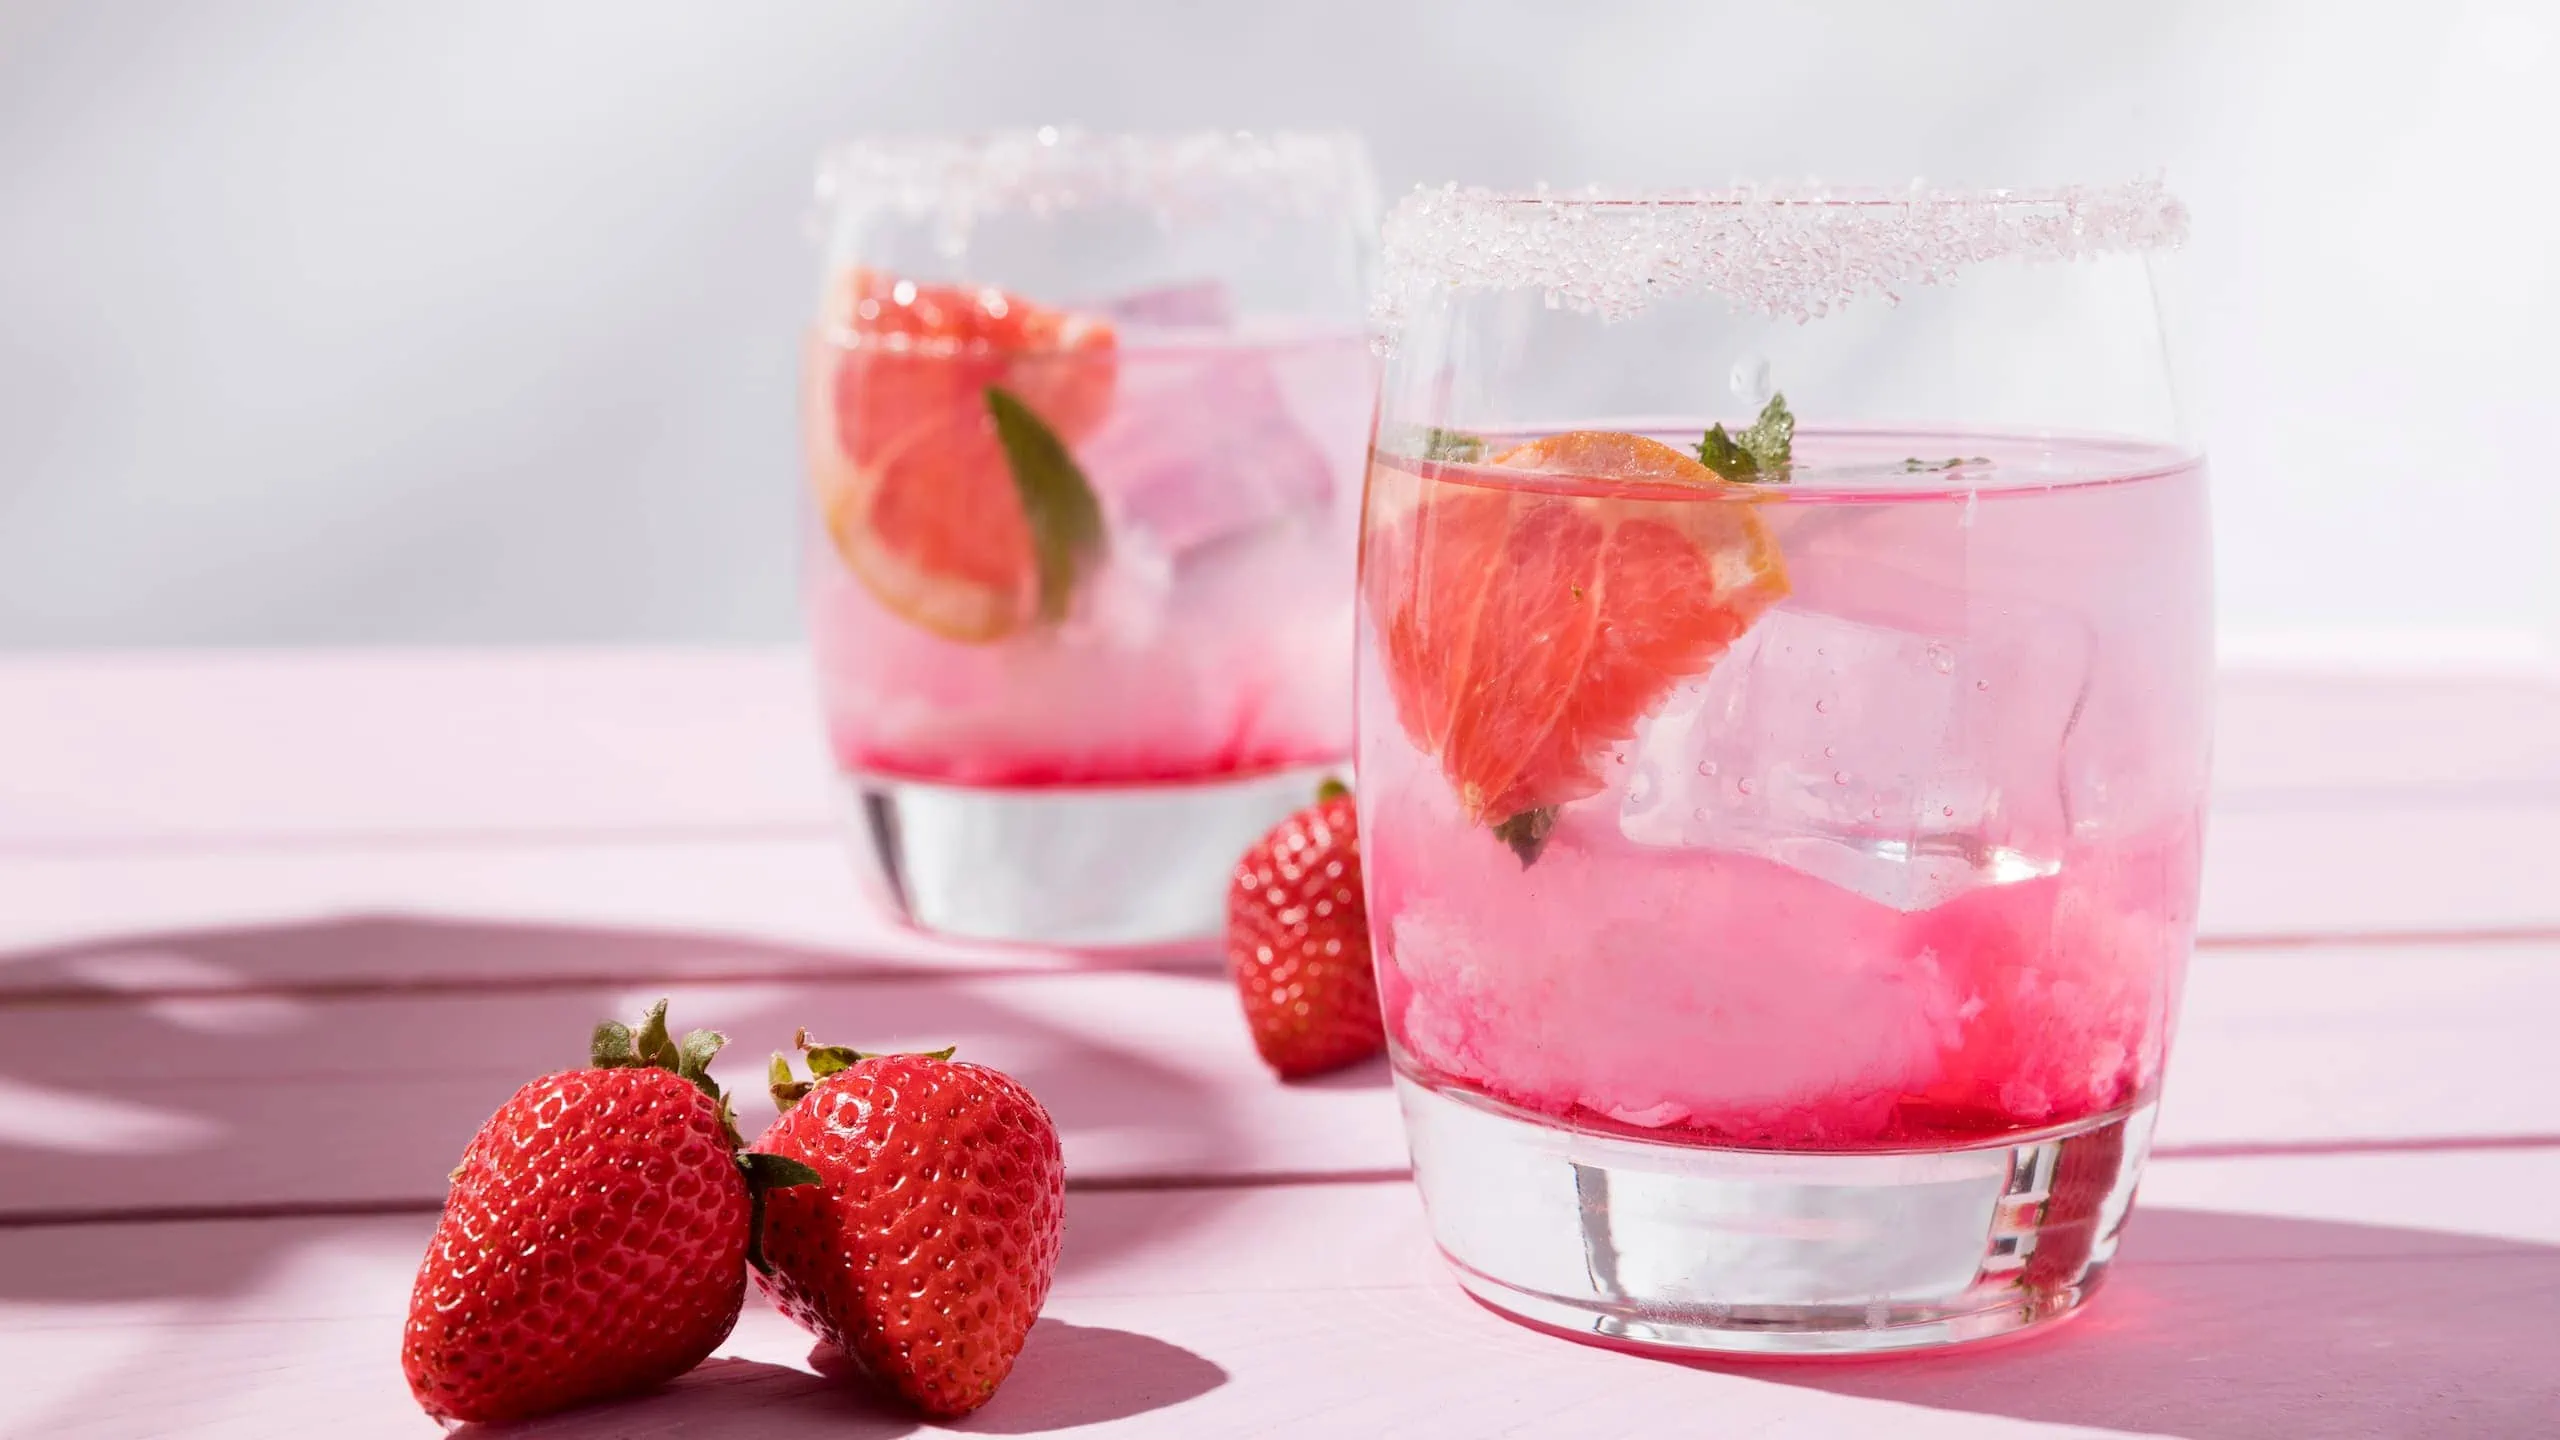 Our pink punch recipe with fresh strawberry